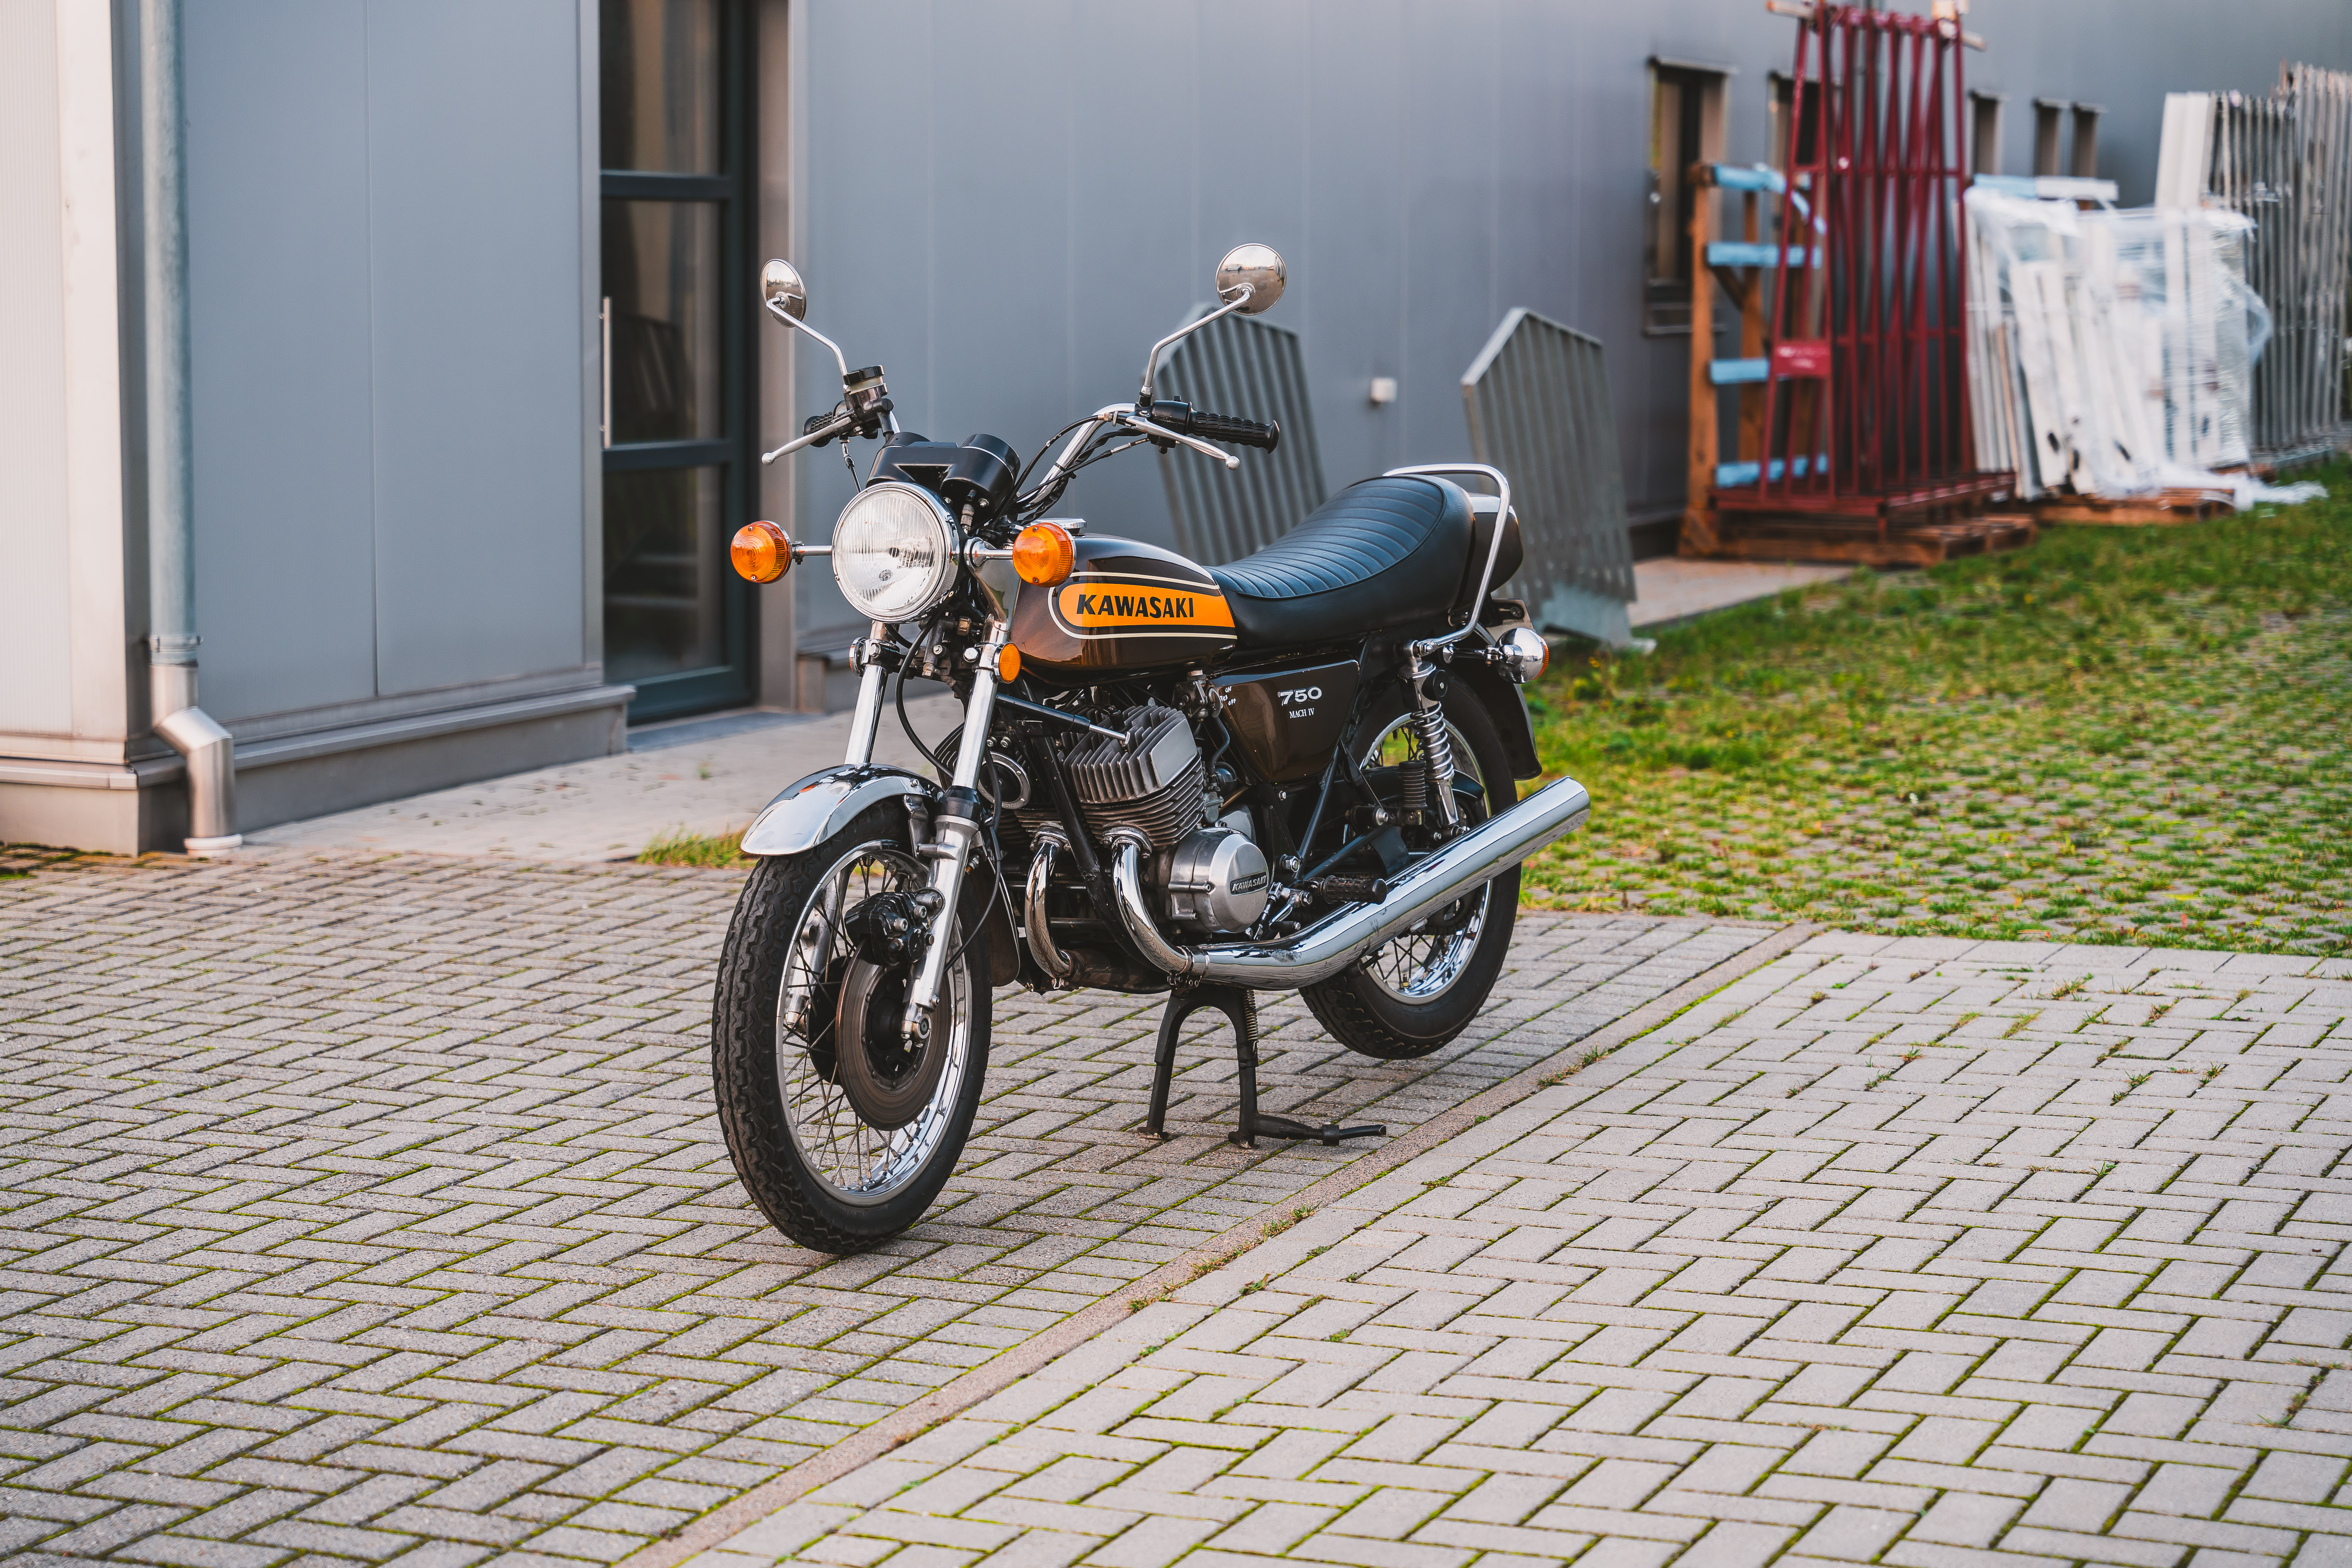 1974 Kawasaki 750 H2 Mach IV for sale by auction in Eupen